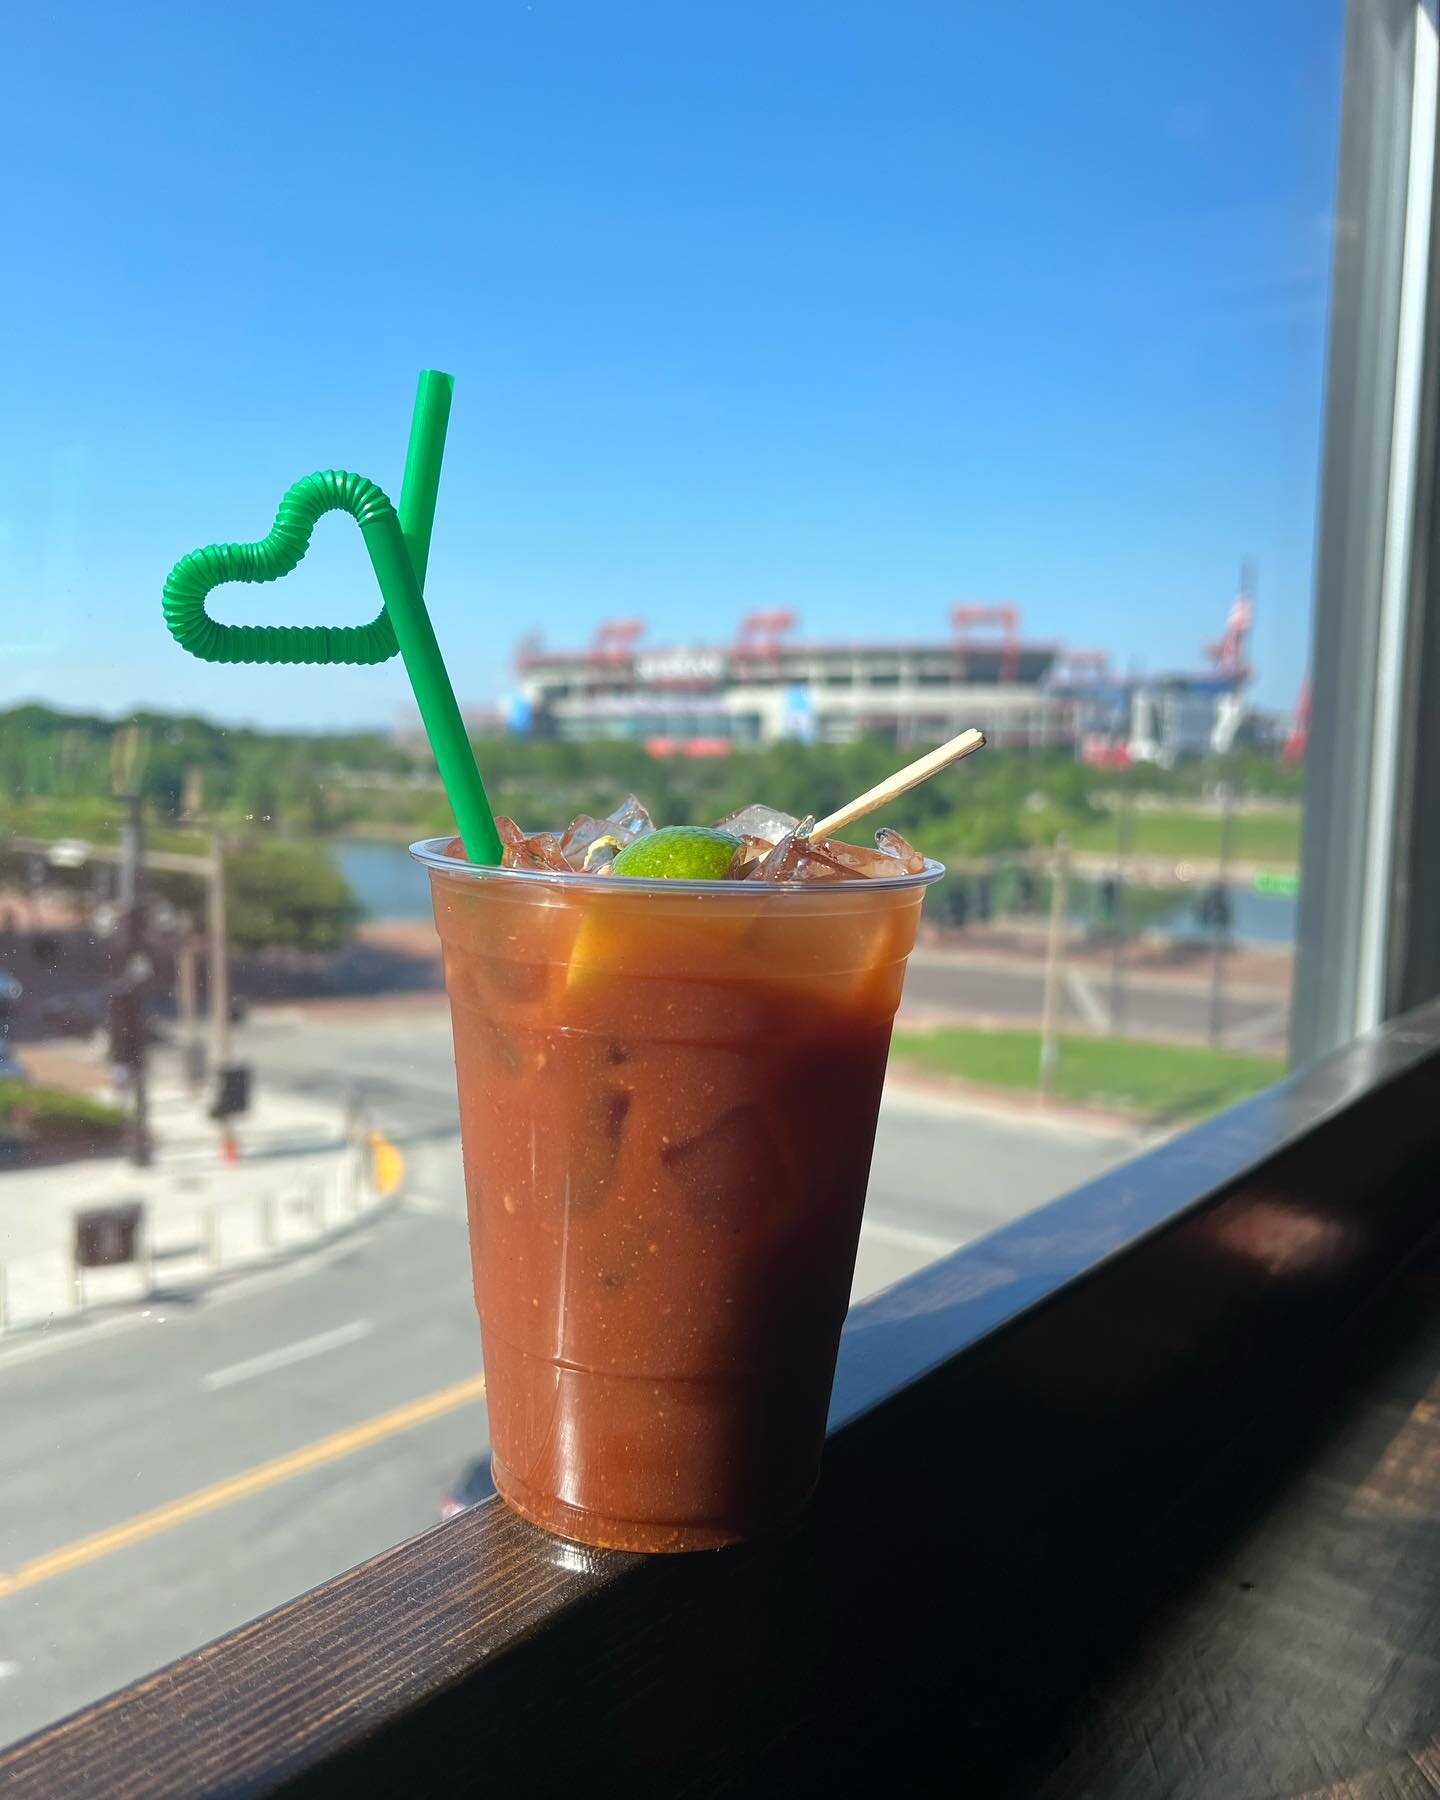 Fight the Sunday scaries with Mimis brunch &amp; a bloody mary! Meet us on the 3rd floor for brunch with a view! 🎳